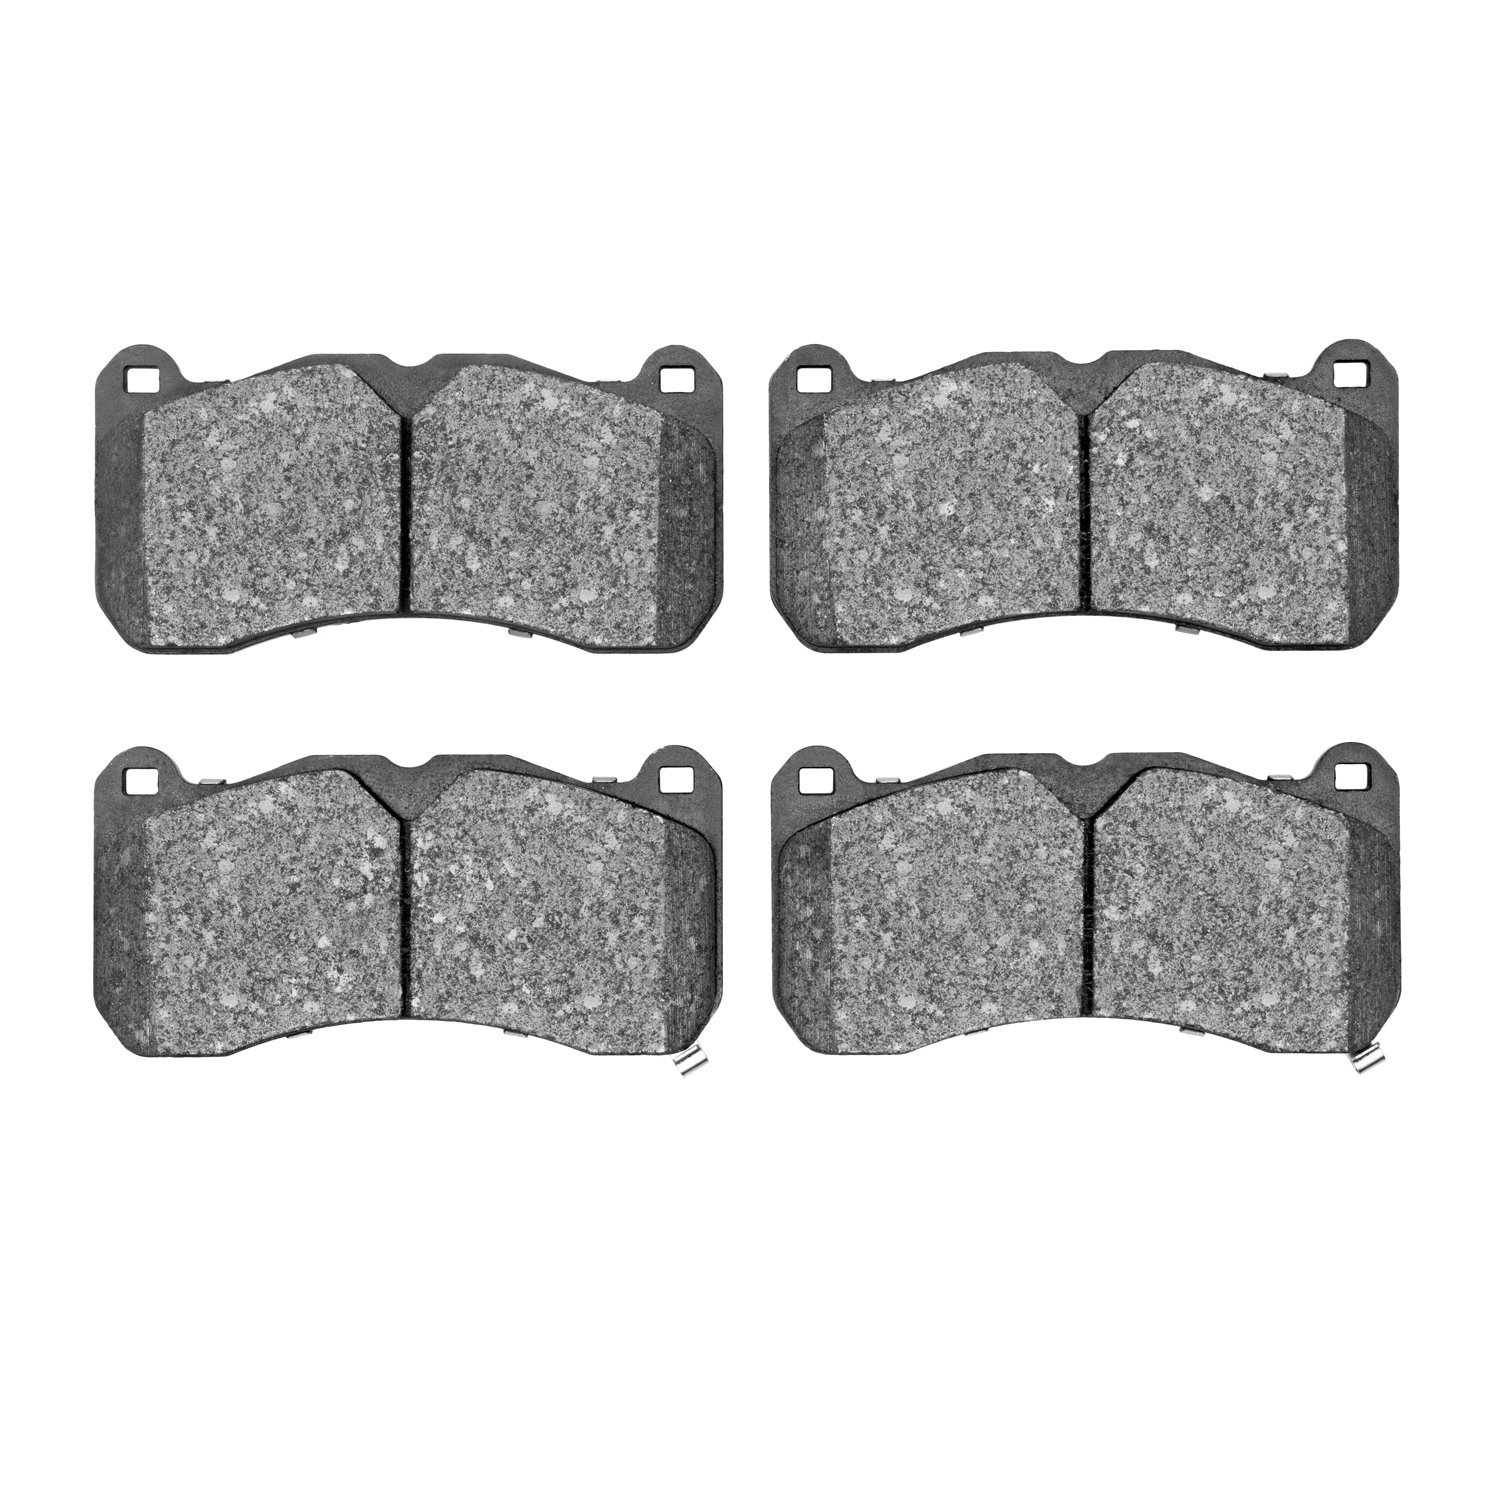 1000-1666-00 Track/Street Low-Metallic Brake Pads Kit, 2013-2014 Ford/Lincoln/Mercury/Mazda, Position: Front